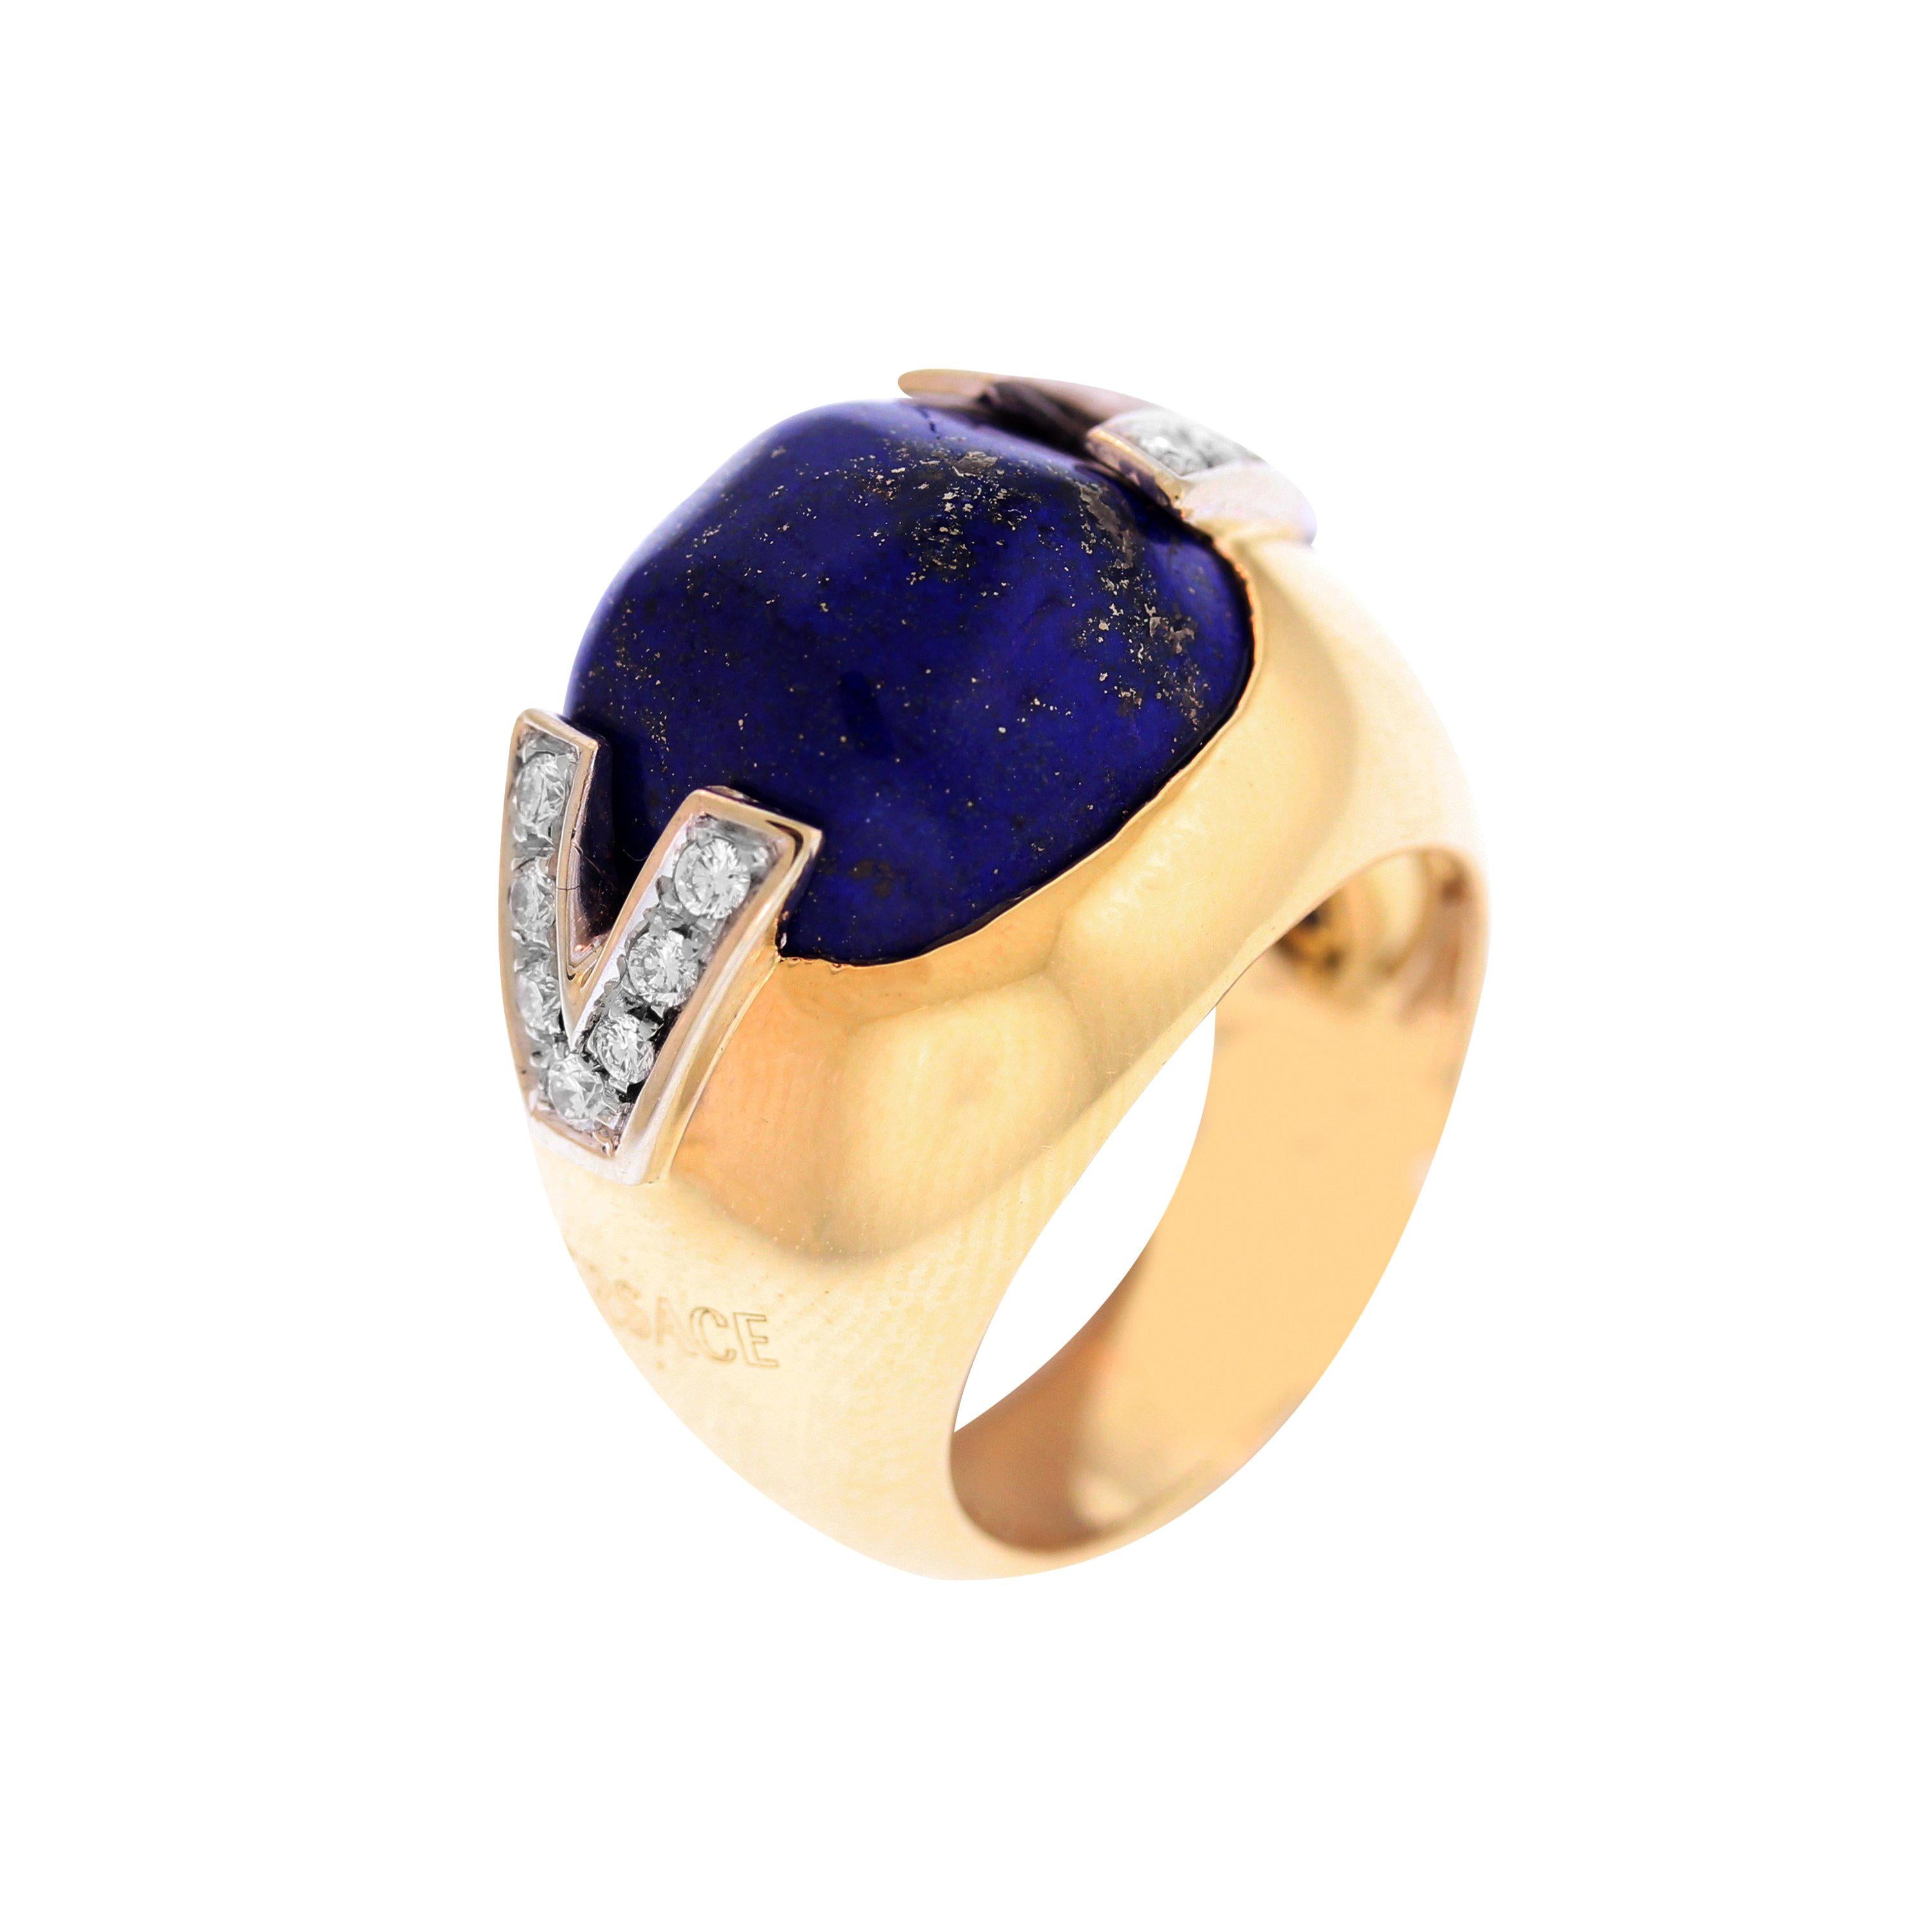 Versace Yellow Gold and Diamond Ring with Lapis Lazuli Center